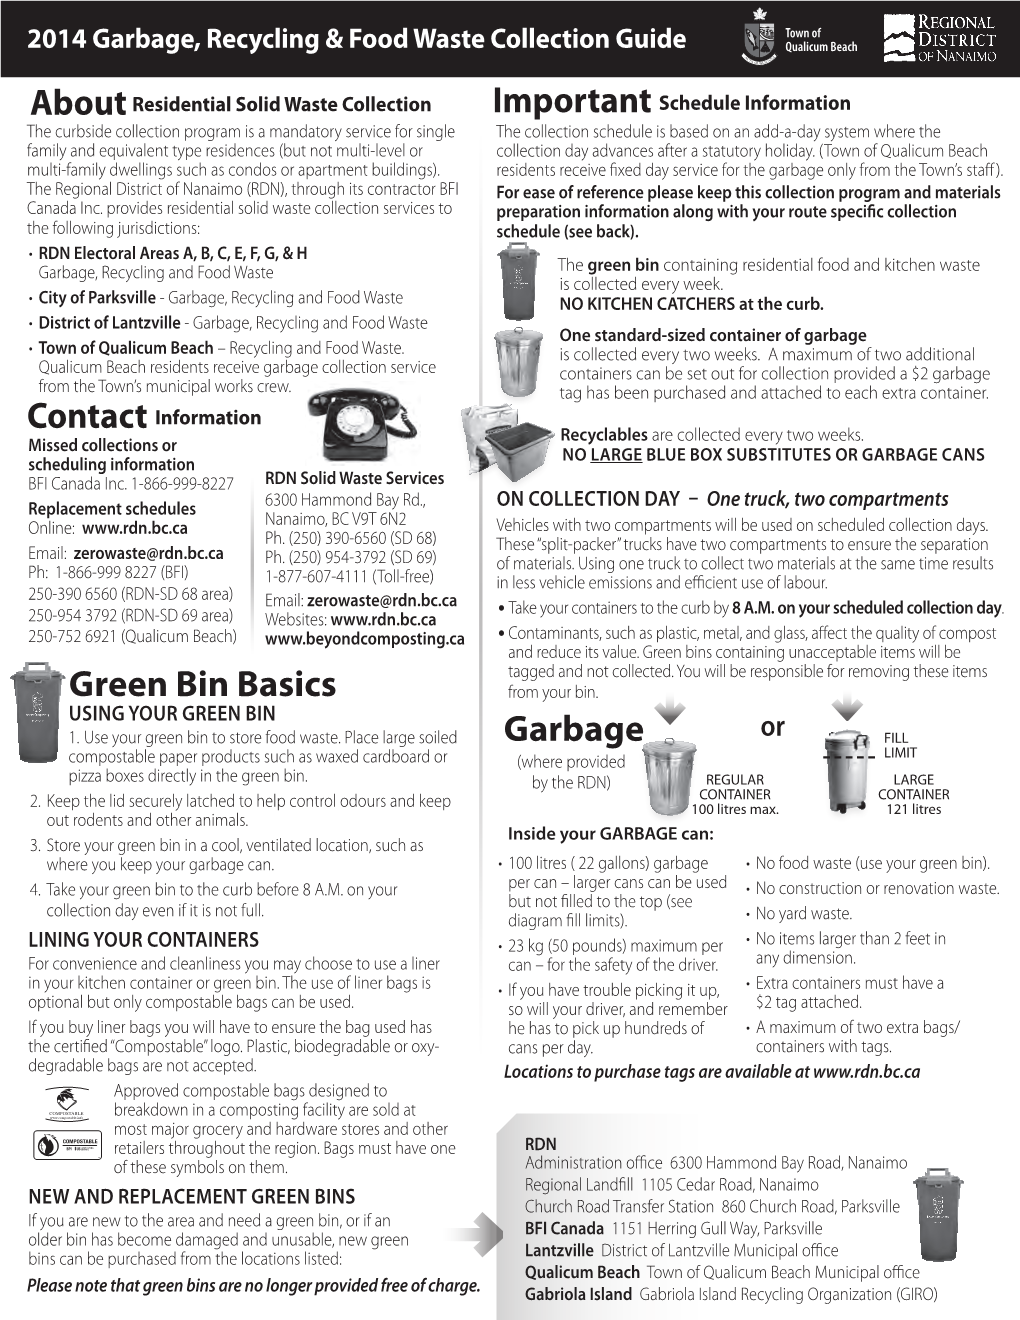 About Important Garbage Green Bin Basics